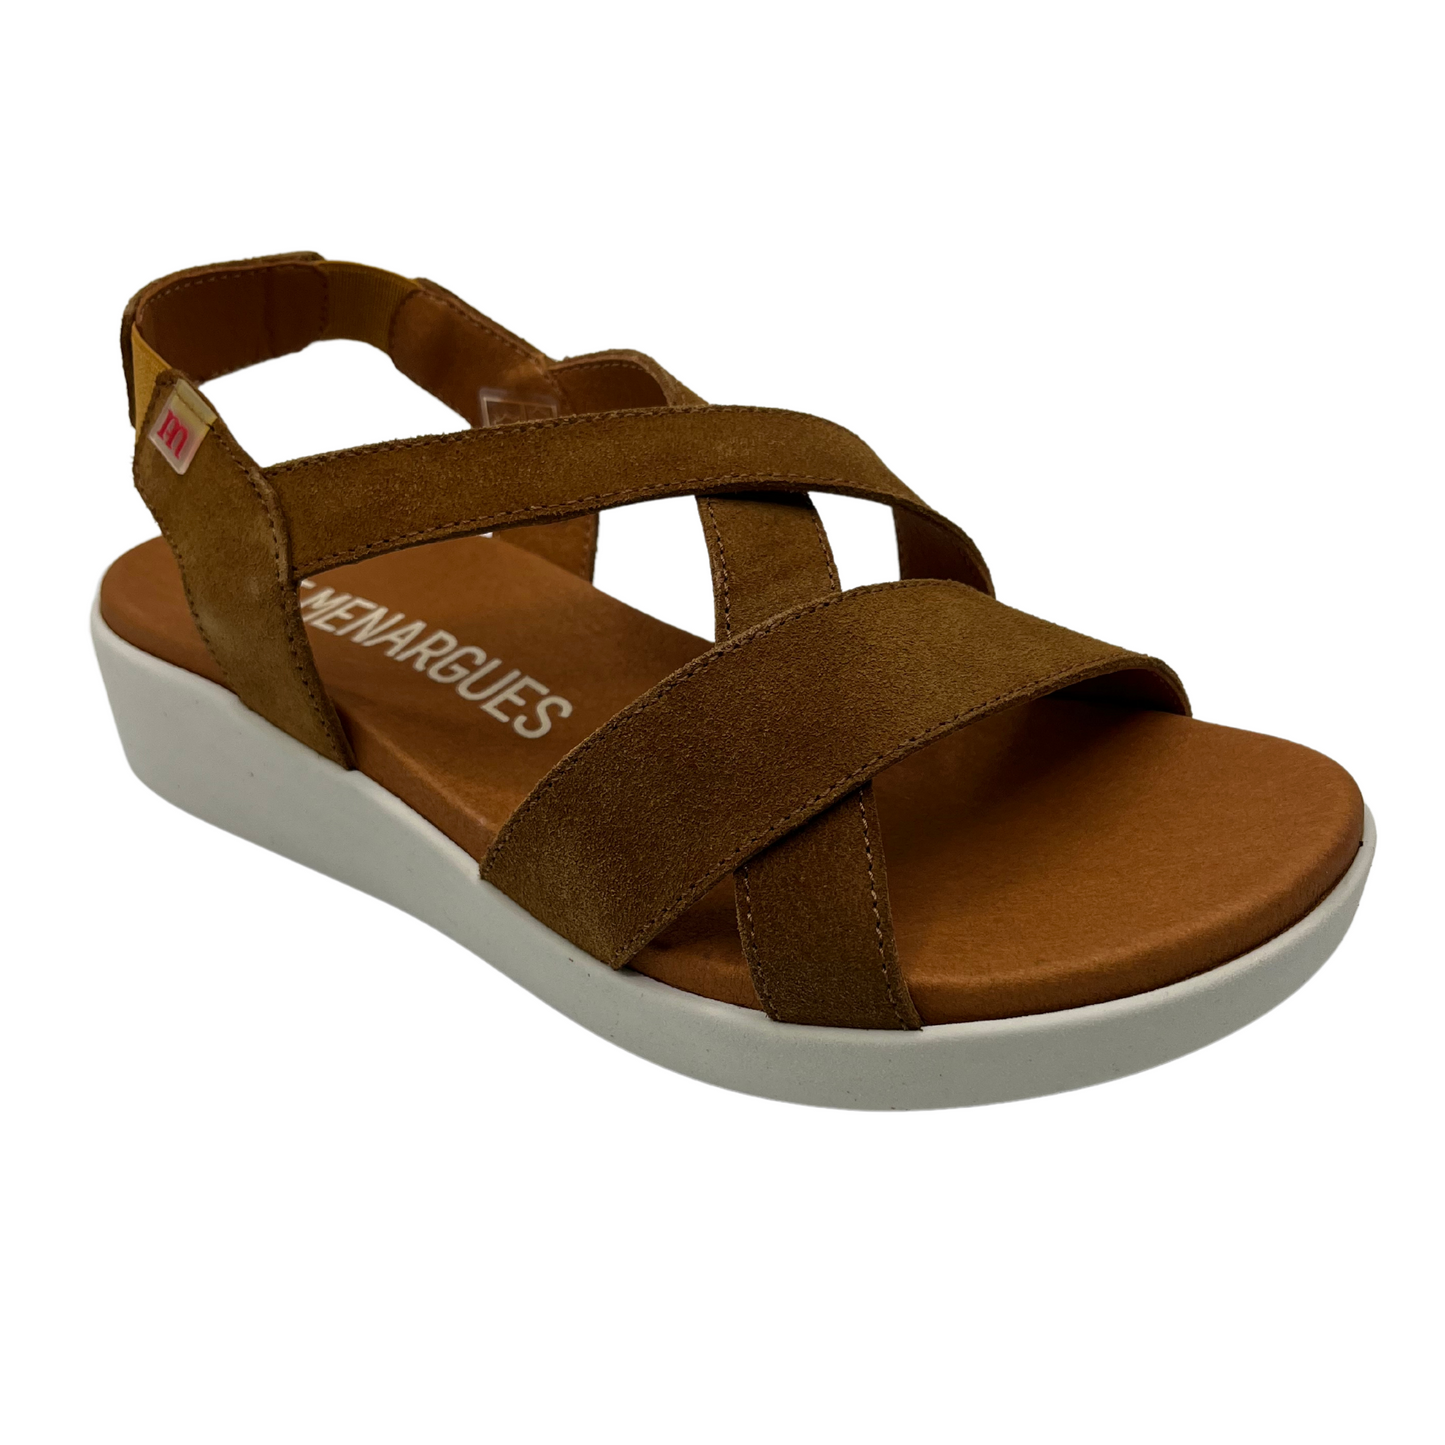 45 degree angled view of brown suede sandals with white rubber outsole